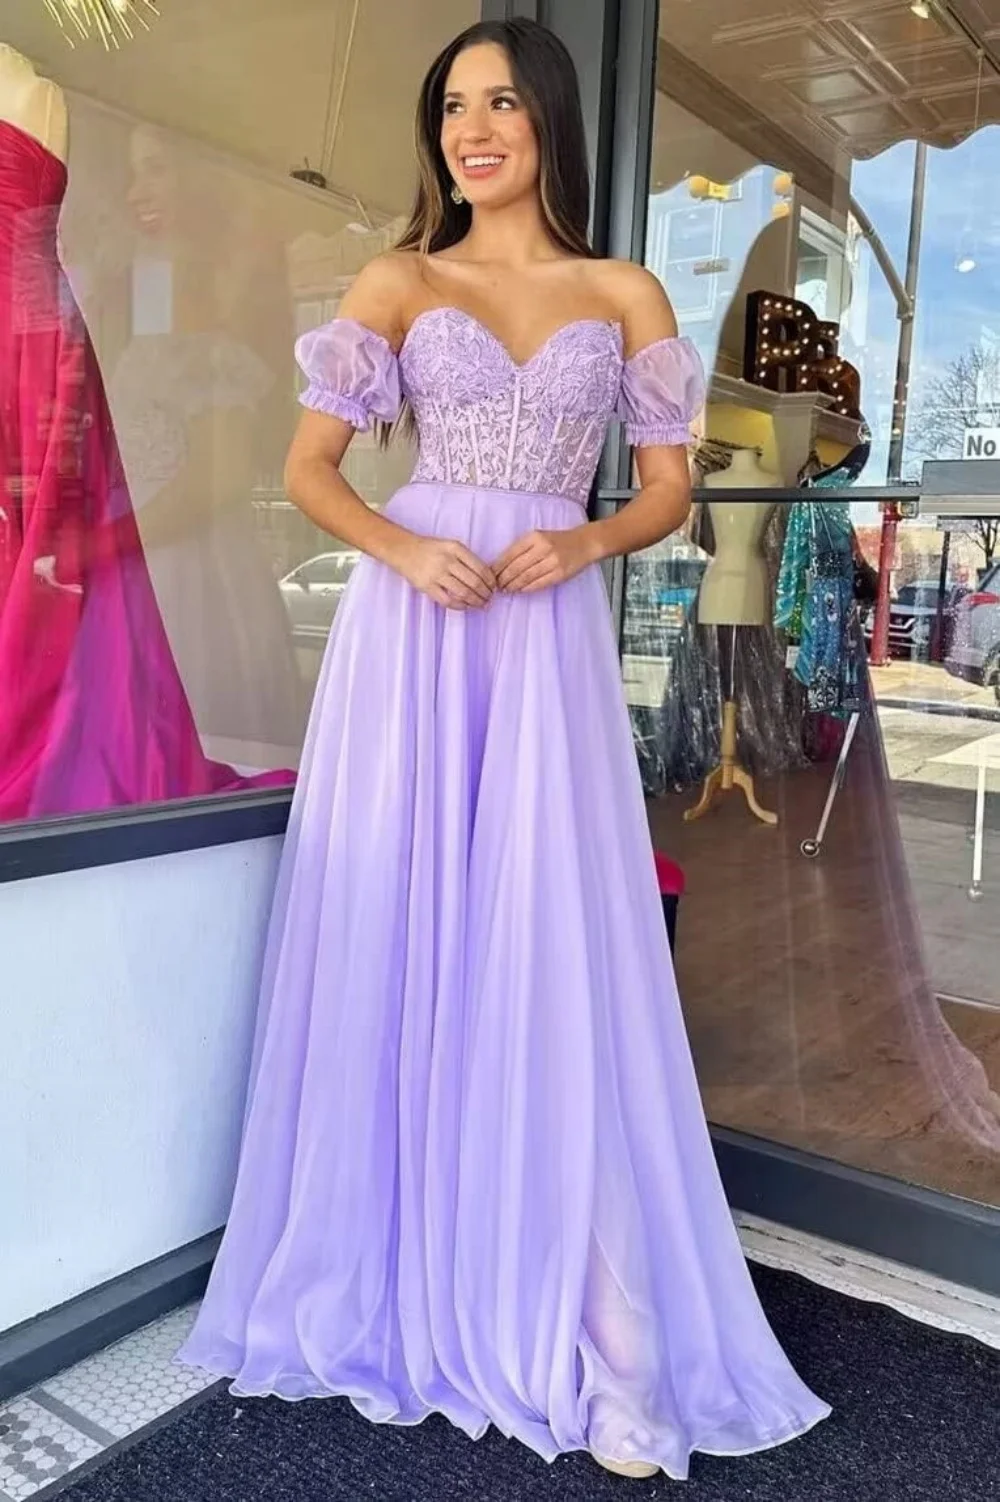 

Classic Sweetheart Prom Dresses Off Shoulder Applique Long A Line Lace Floor Length Chiffon Evening Party Gowns Pageant Dress